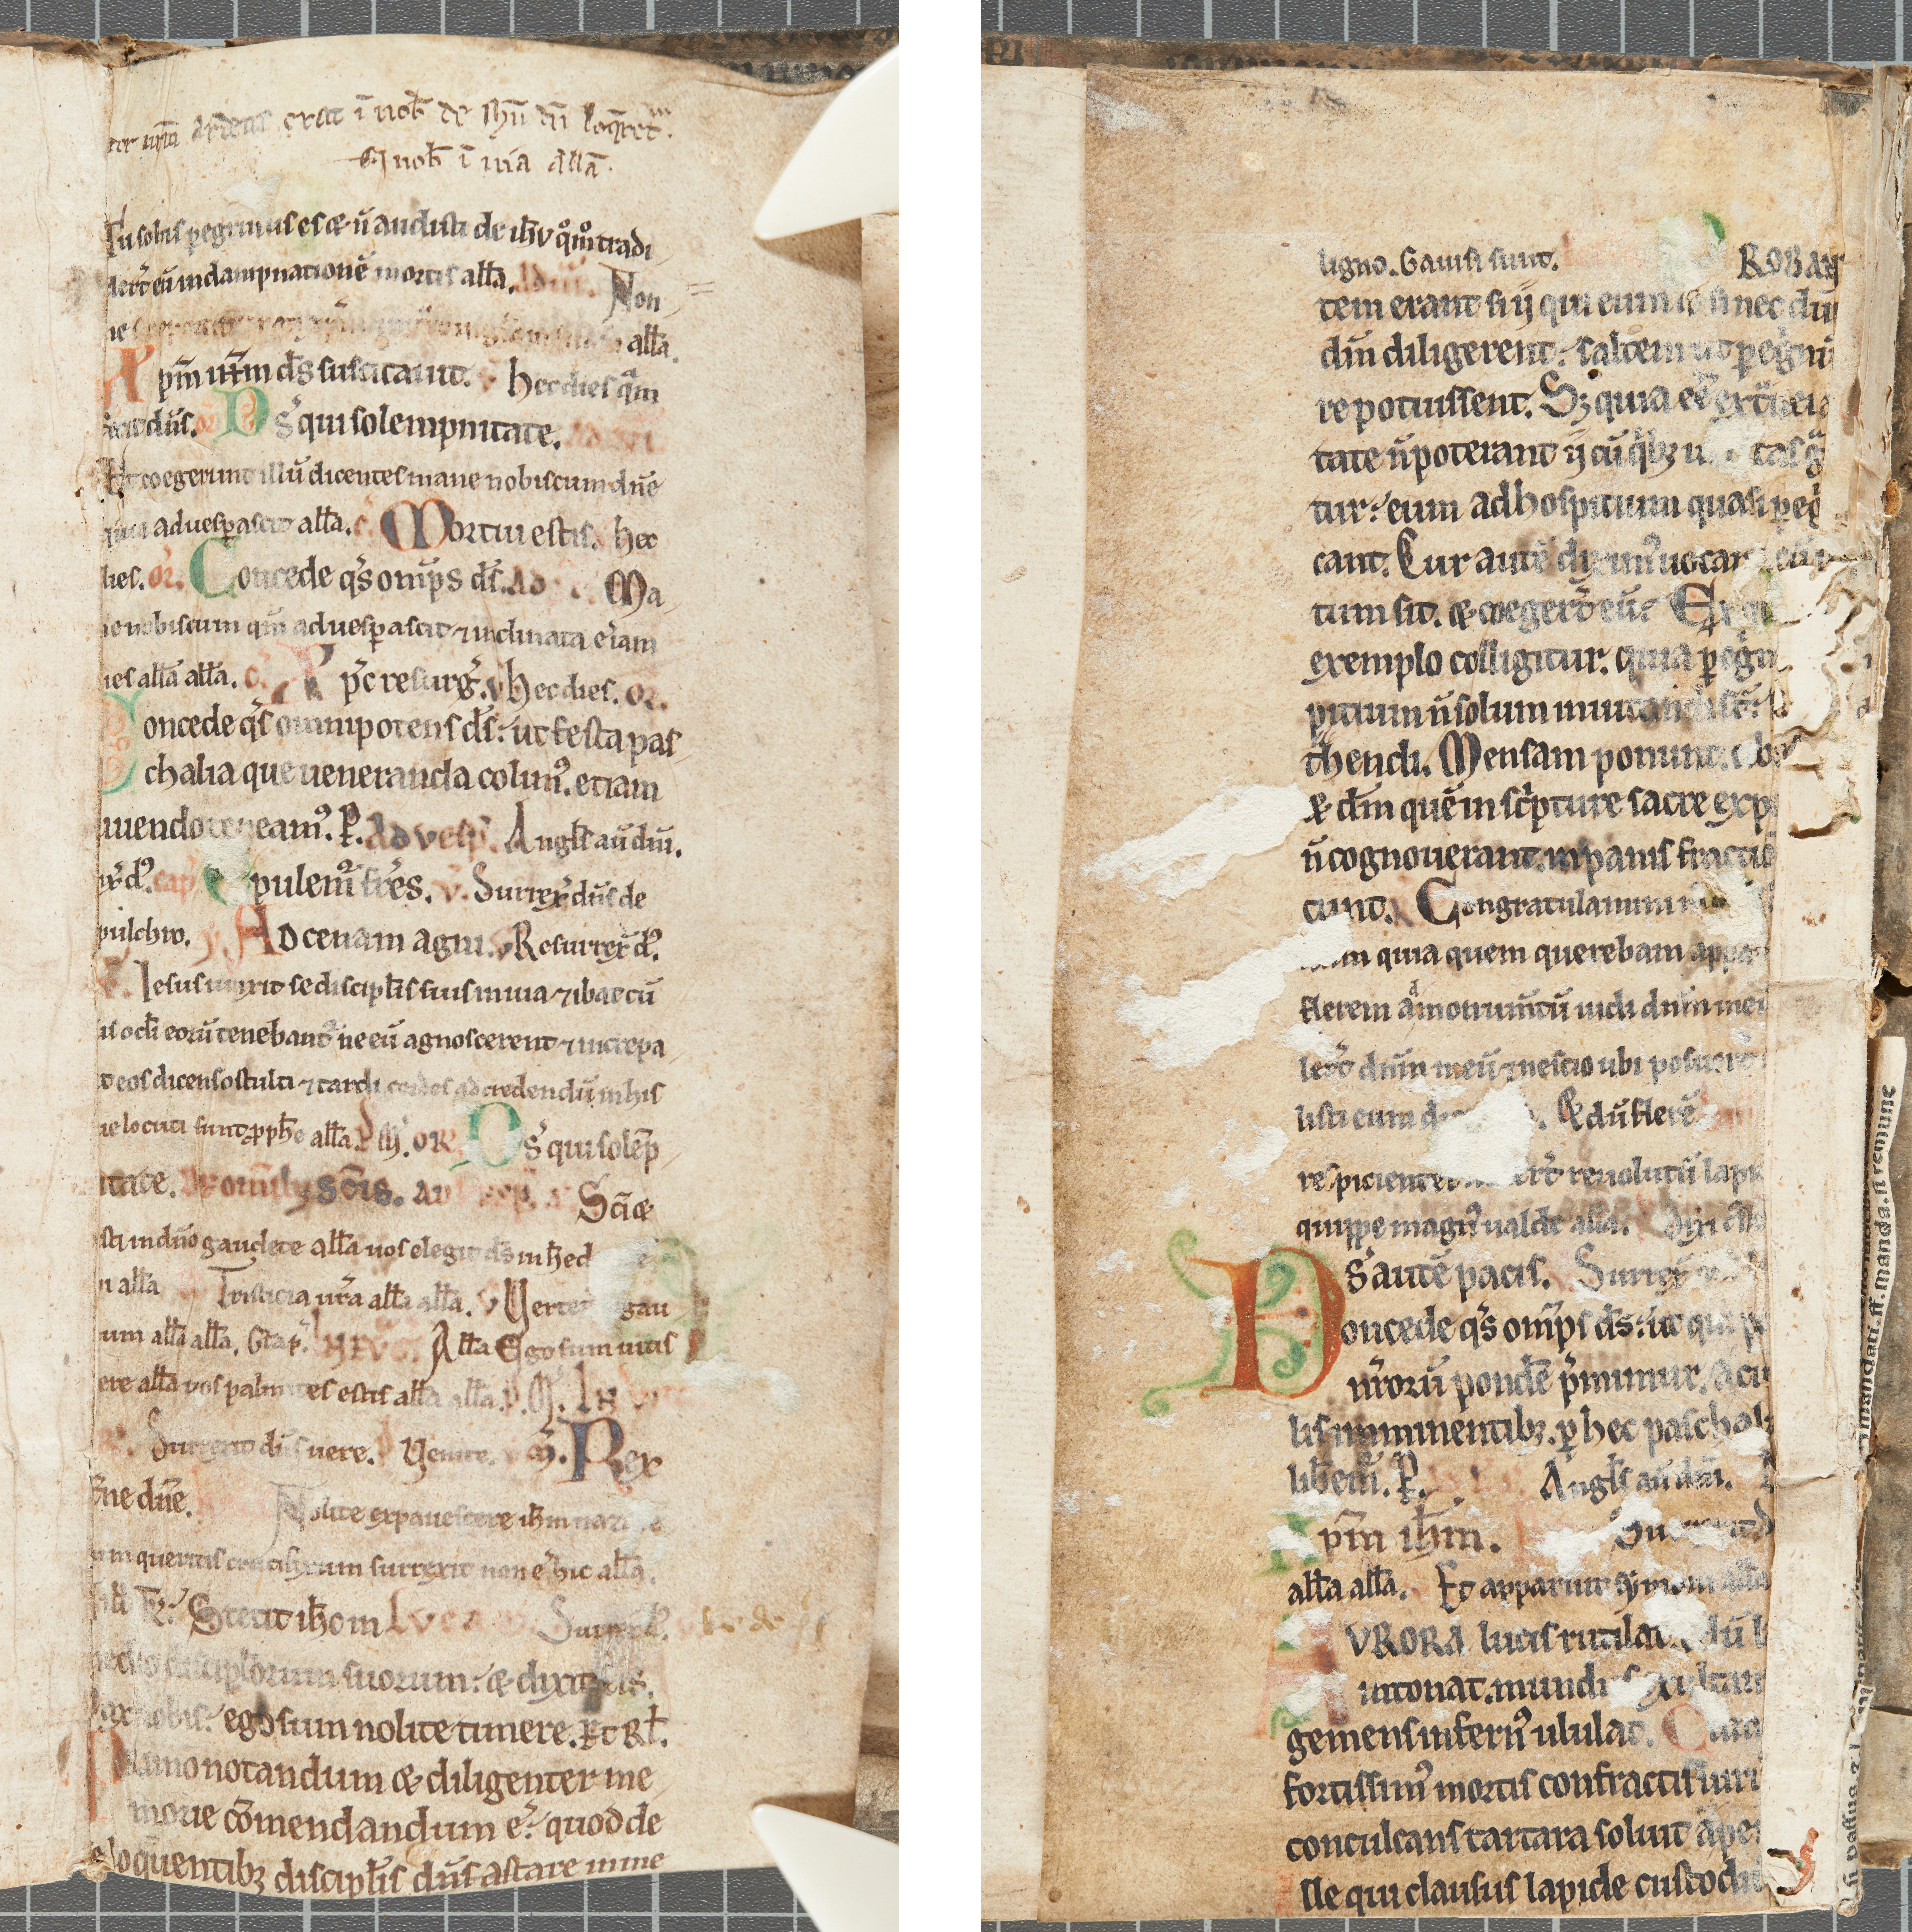 The second of two fragmentary leaves of a 12th century manuscript found sewn into the front and back of TypFL.B47GS.